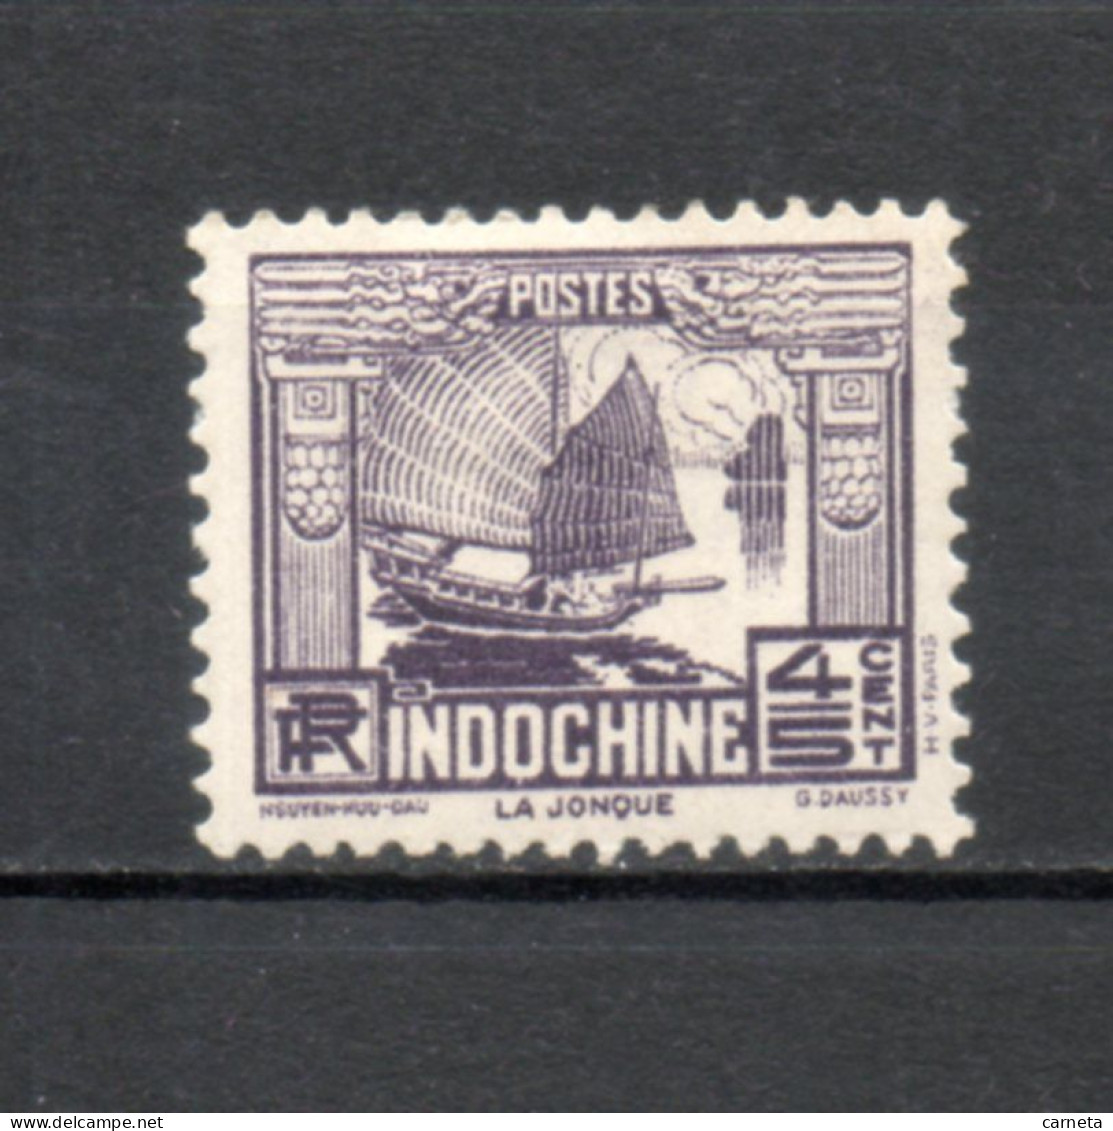 INDOCHINE    N° 154  NEUF AVEC CHARNIERE   0.20€   JONQUE BATEAUX - Unused Stamps